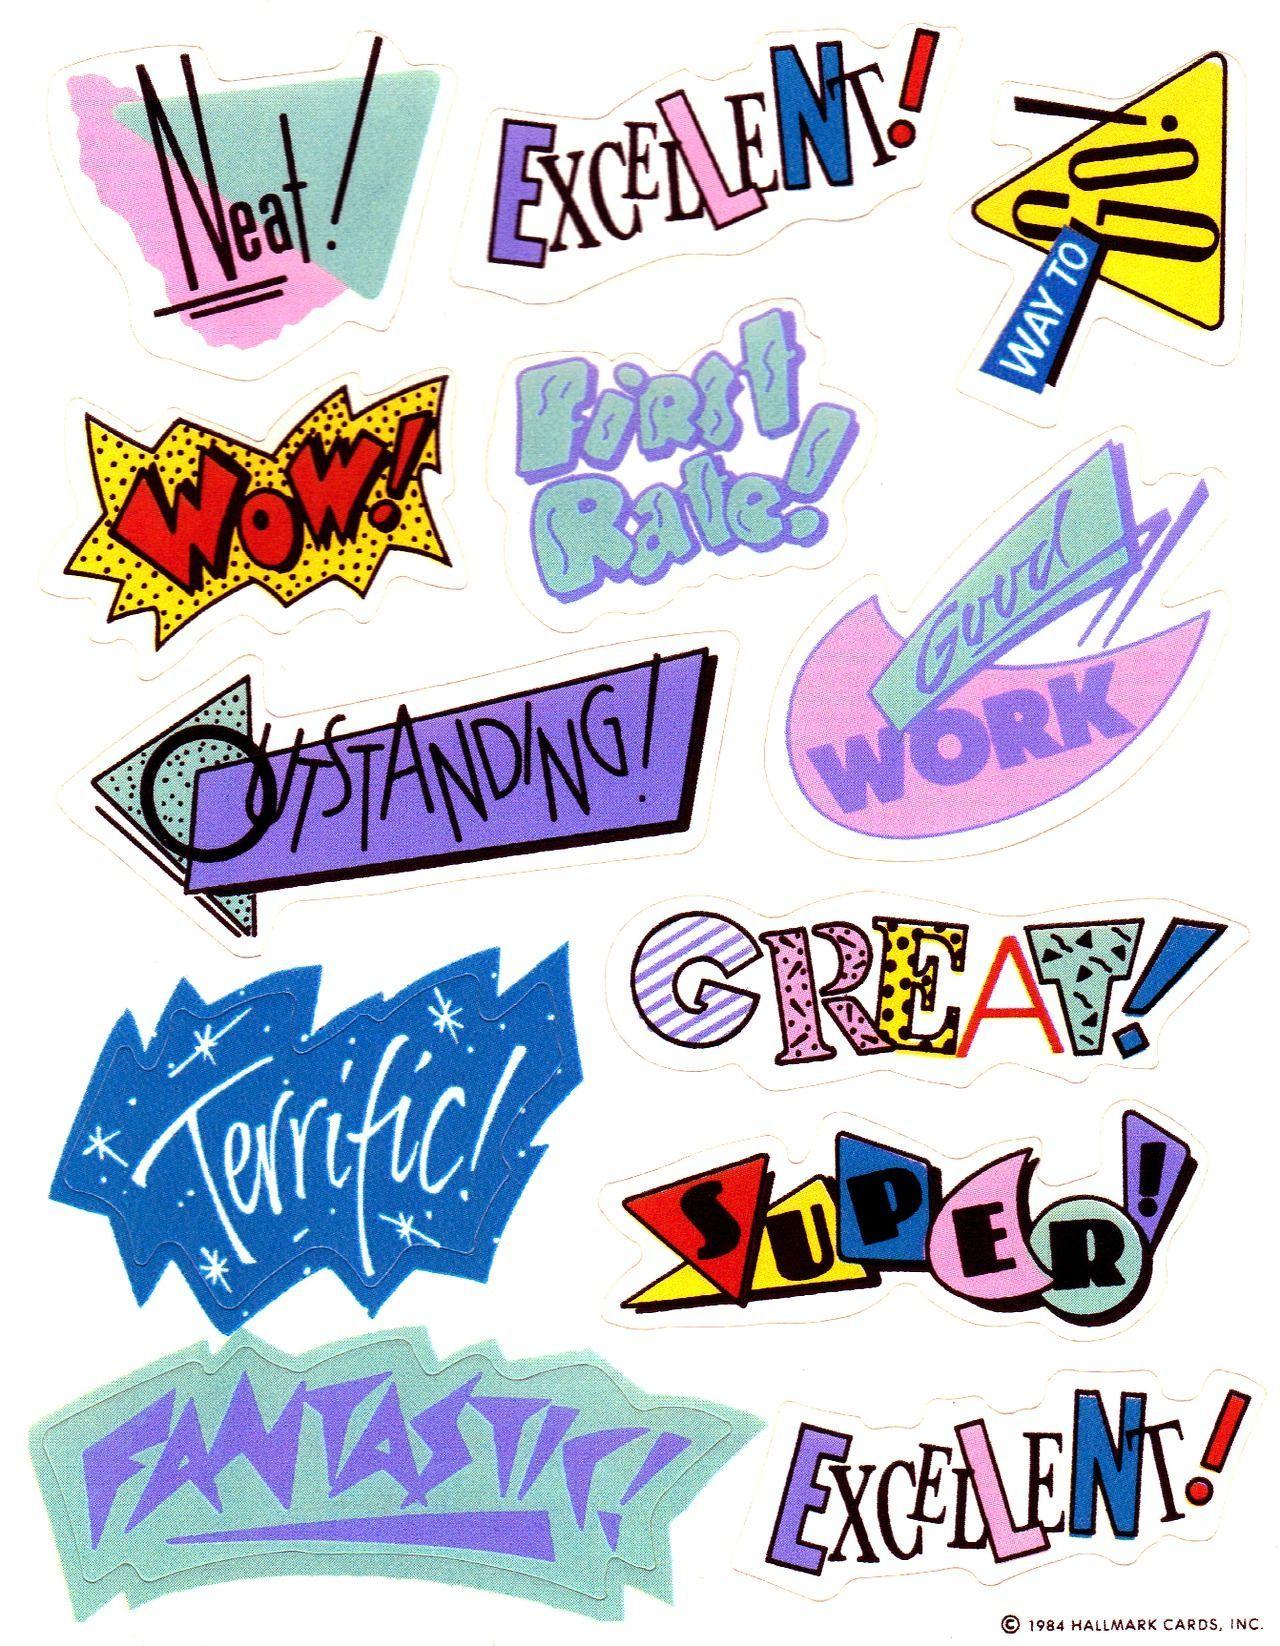 90s Logo - 90's stickers. | Design | Pinterest | Typography, Fonts and Logos